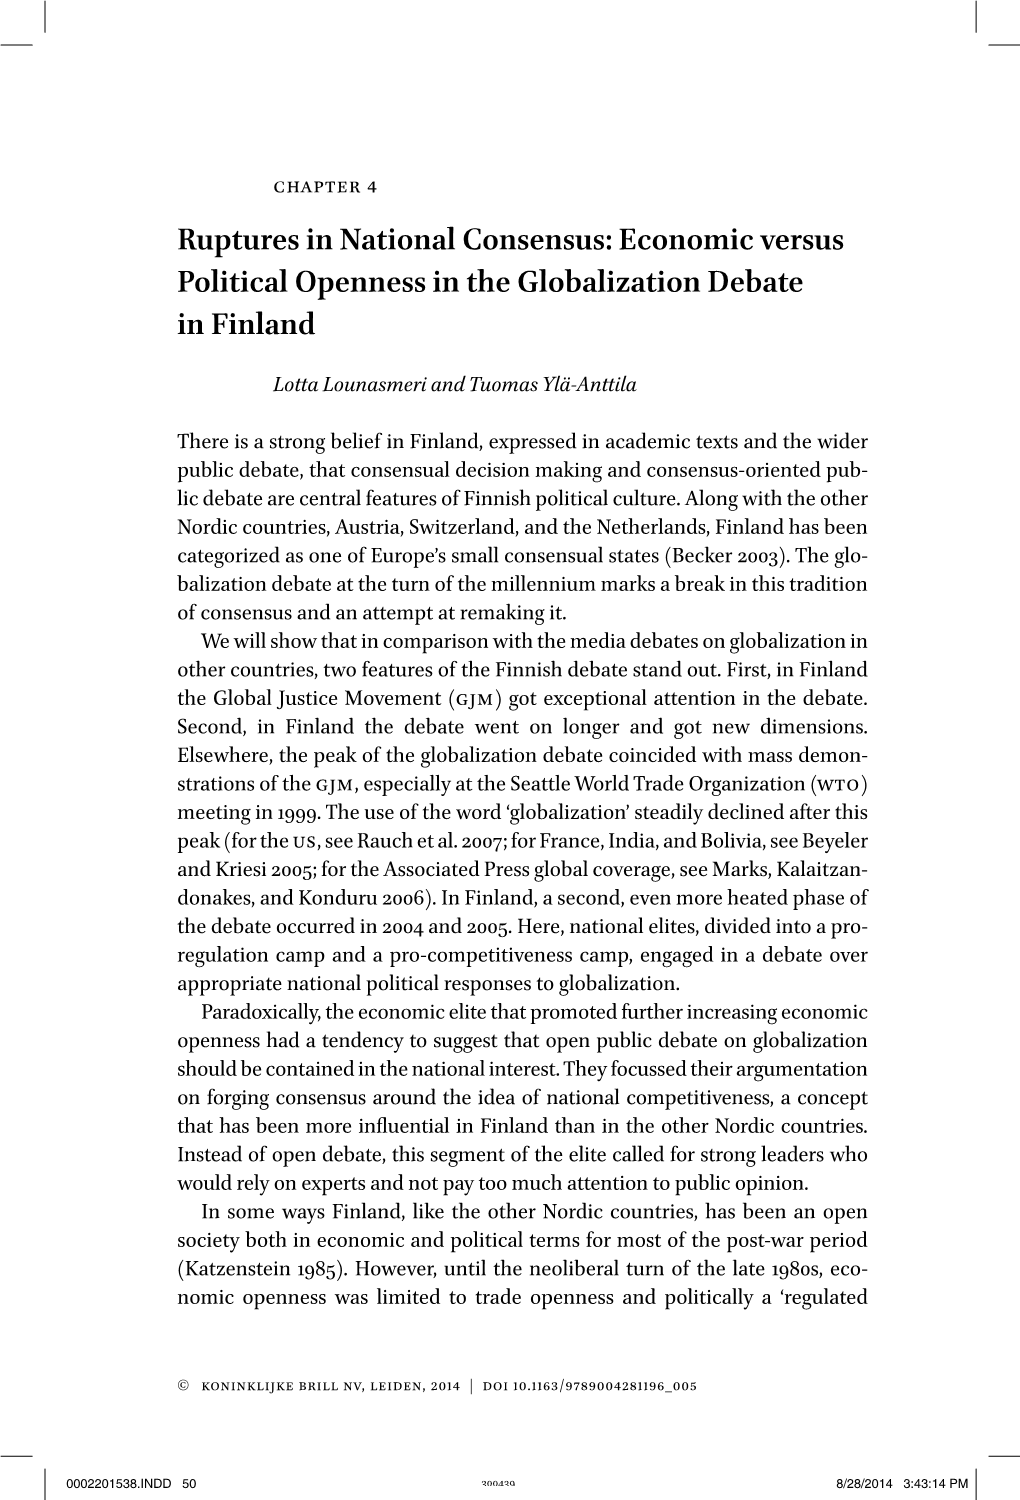 Ruptures in National Consensus: Economic Versus Political Openness in the Globalization Debate in Finland